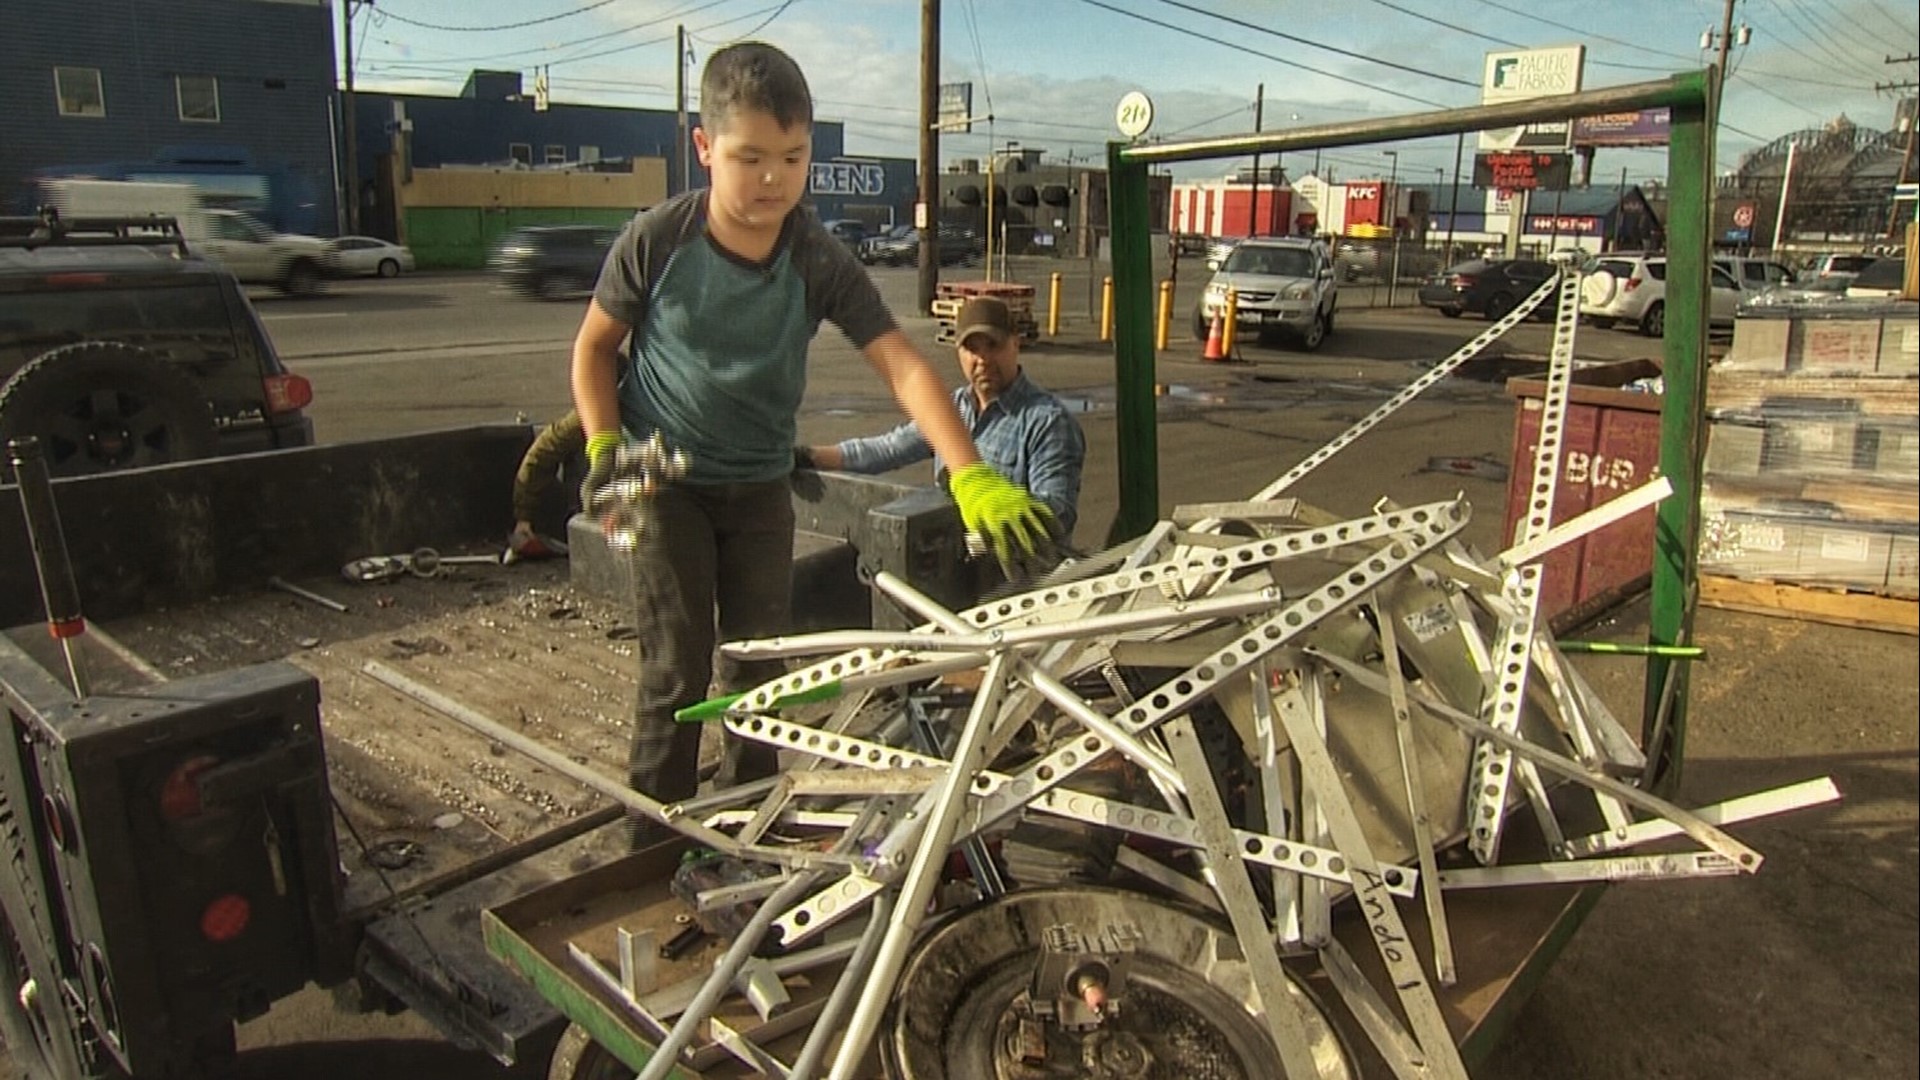 Tristan Schwiethale is only 10, but he's recycled more things than most people do in a lifetime. Sponsored by Kaiser Permanente.